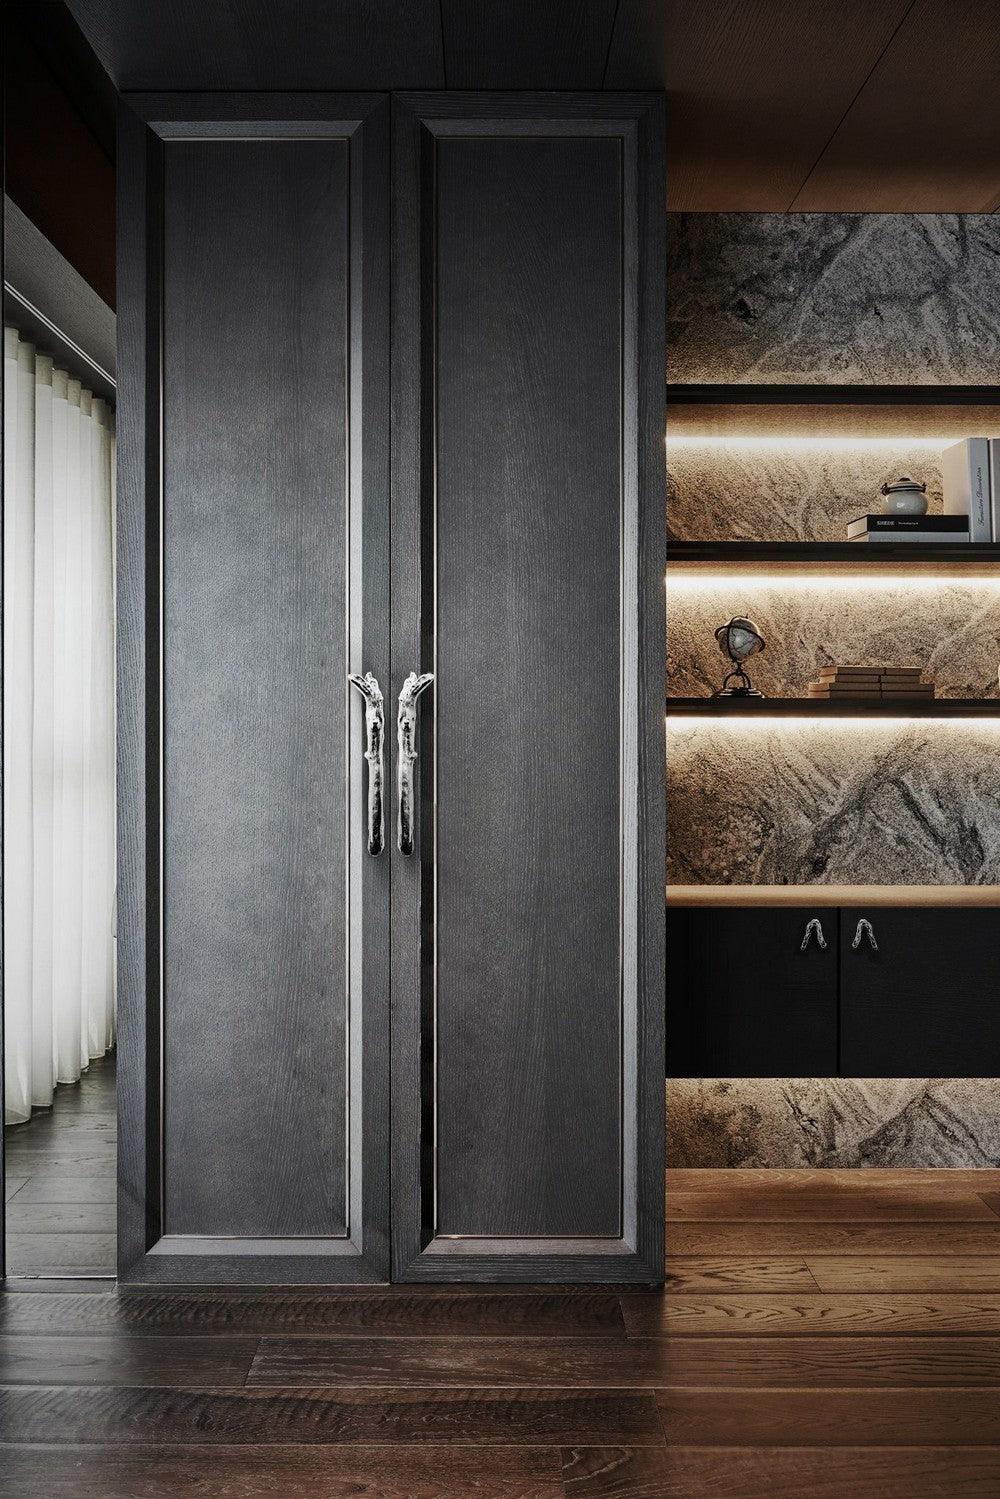 DECORATIVE HARDWARE INSPIRATIONS IN TRENDY HUES OF ULTIMATE GRAY